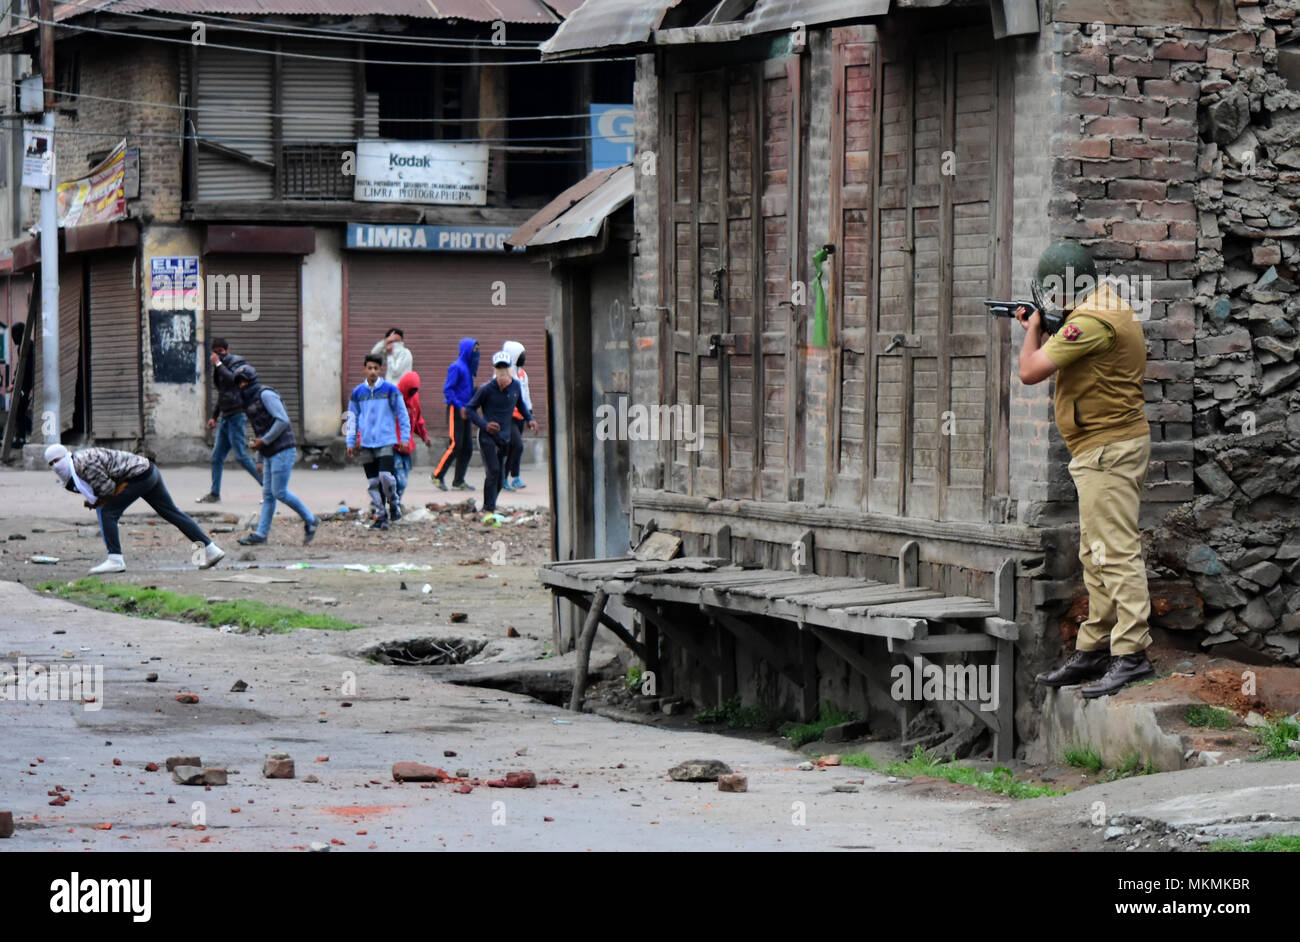 Srinagar, India. 07th May, 2018. An Indian policeman aims at Kashmiri protesters as Youth clash with Indian government forces in Srinagar, Indian Administered Kashmir on 07 may 2015. Hundreds of youth took to the streets and clashes with Government forces against the Killings of 5 Civilians and 5 rebels during a gunfight in Shopian district of the Valley on 06 May 2018. Meanwhile curfew had been put in place to thwart the protests. Credit: Muzamil Mattoo/Pacific Press/Alamy Live News Stock Photo